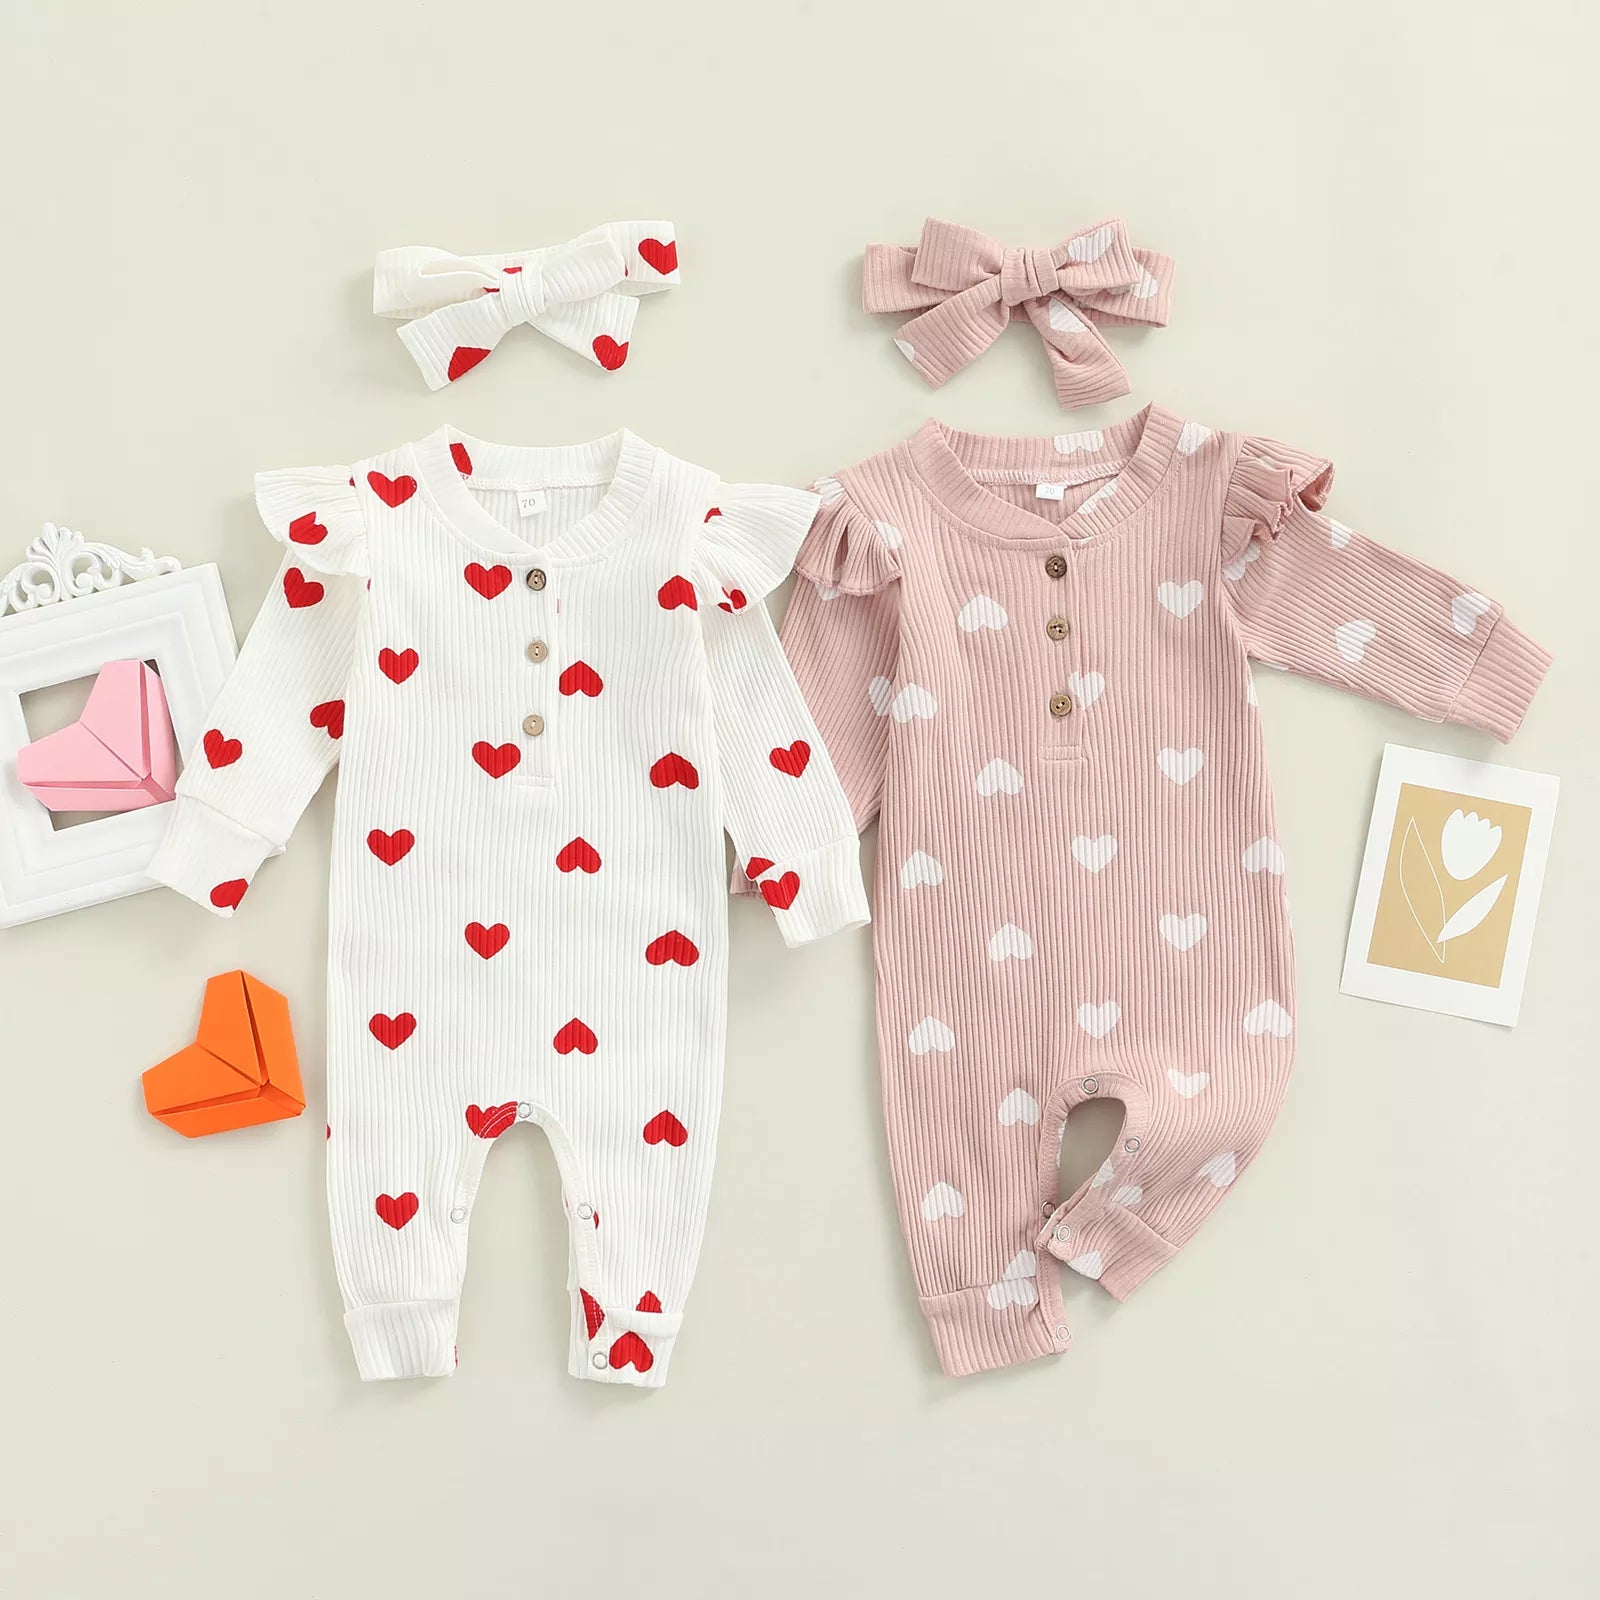 Baby Heart Print Rompers for Valentine's Day